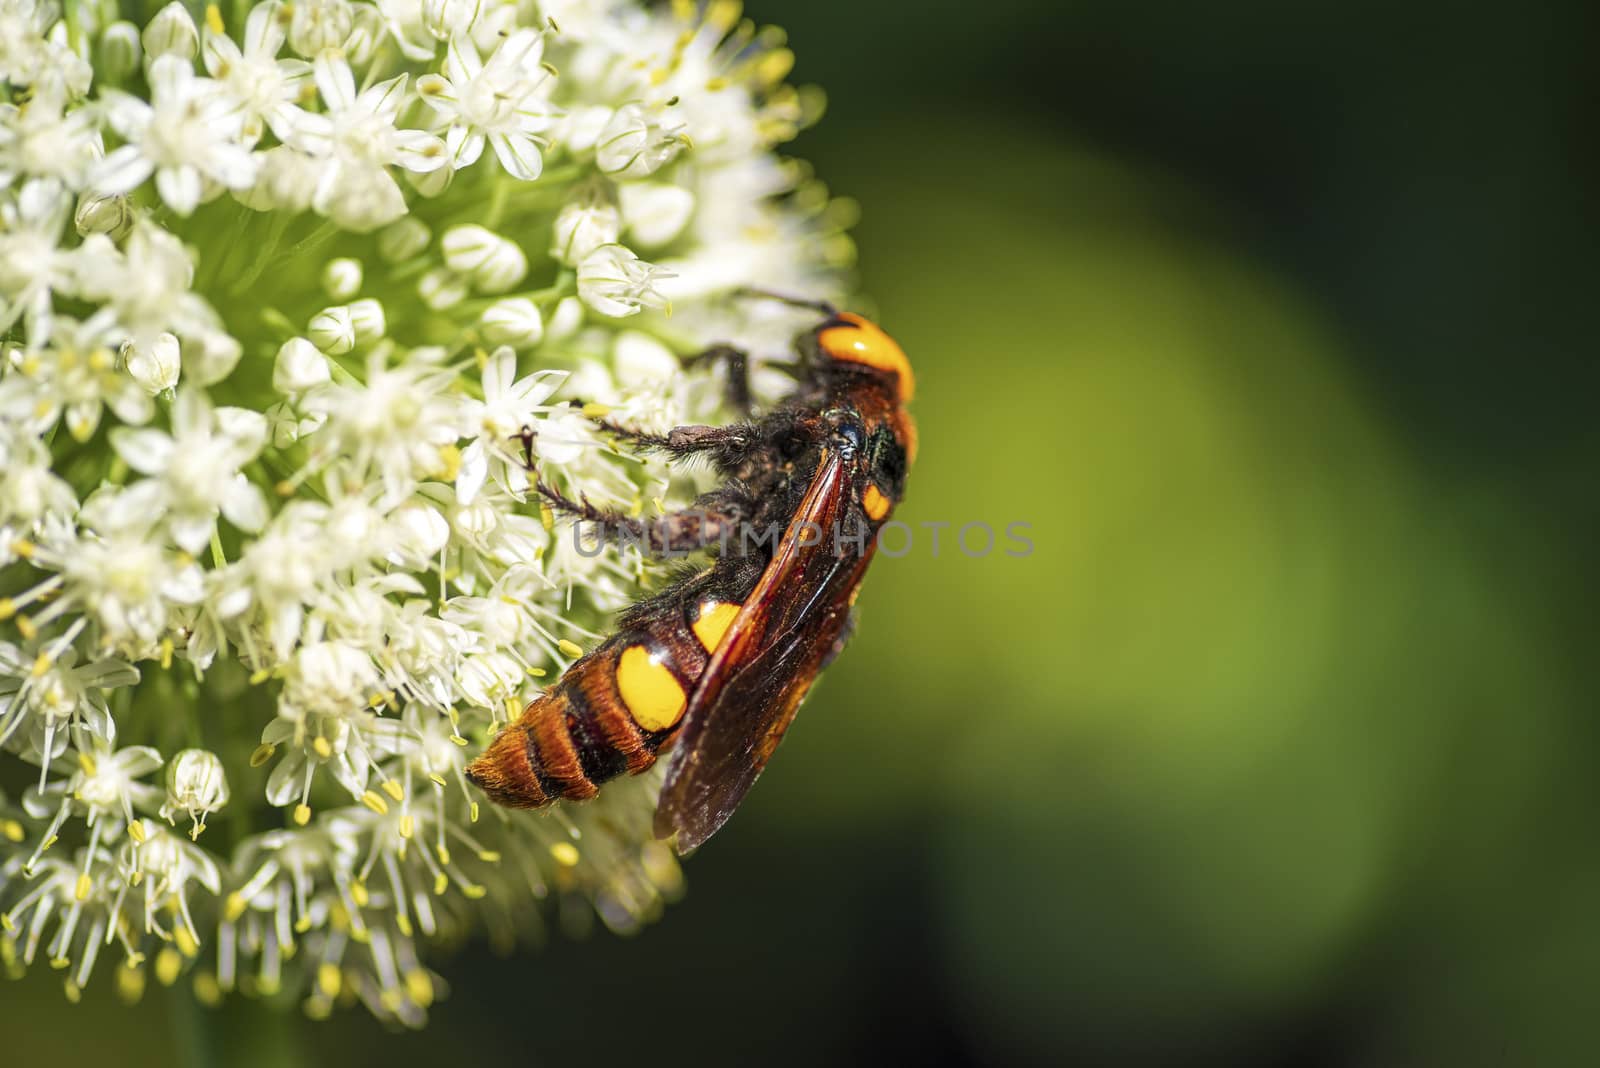 Megascolia maculata. The mammoth wasp. Scola giant wasp on a onion flower. Scola lat. Megascolia maculata is a species of large wasps from the family of scaly . by nkooume